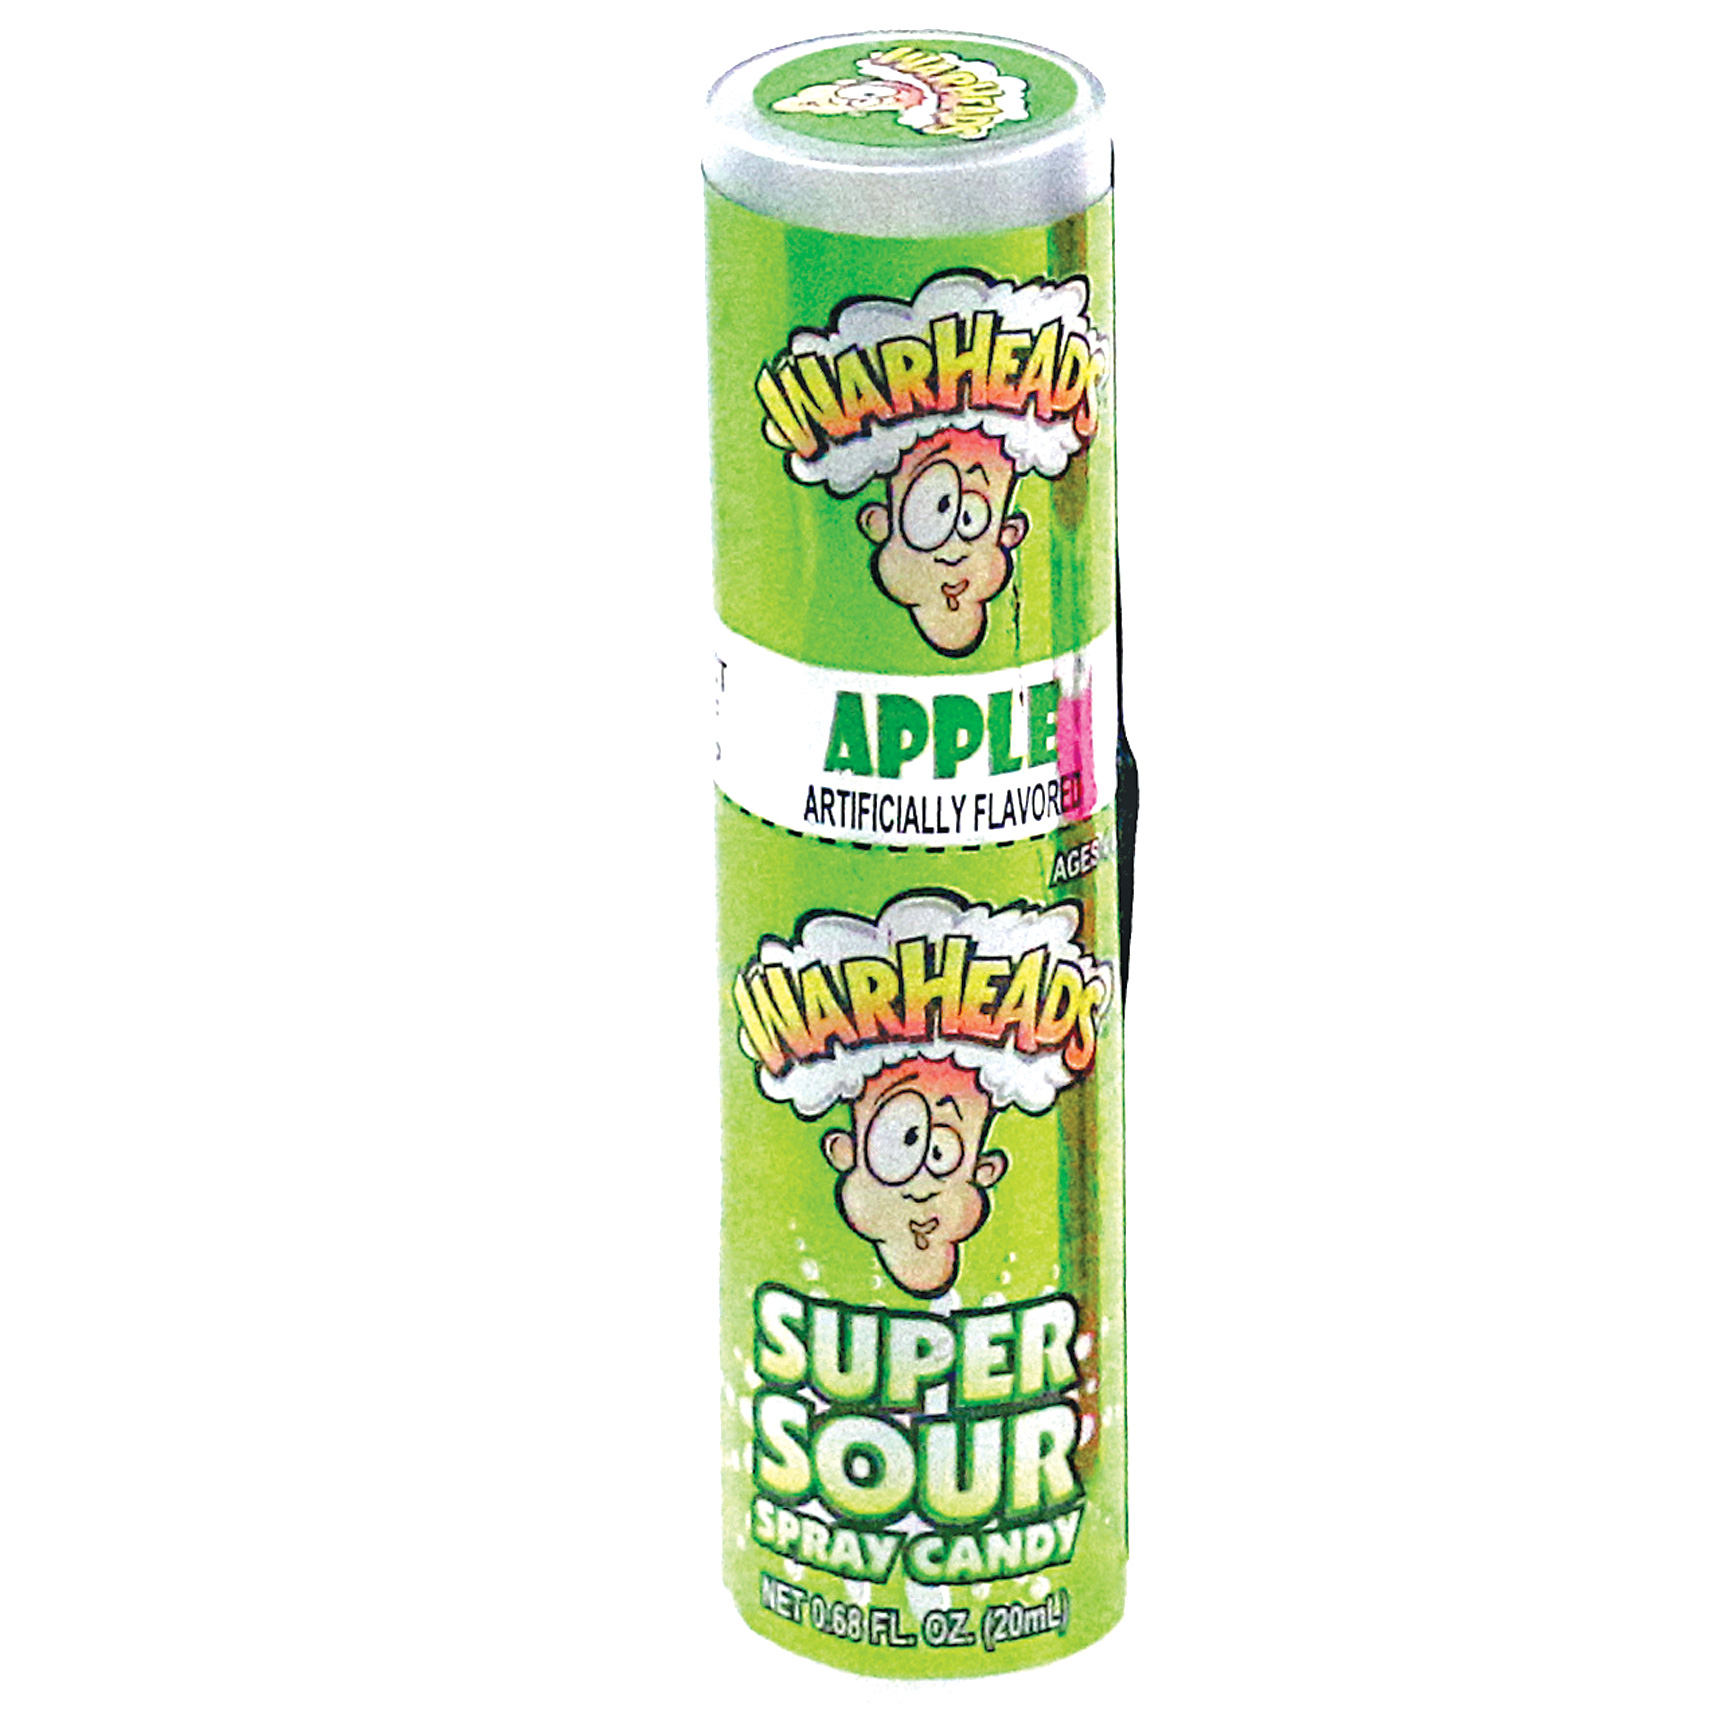 WARHEAD SOUR SPRAY CANDY 24/DS